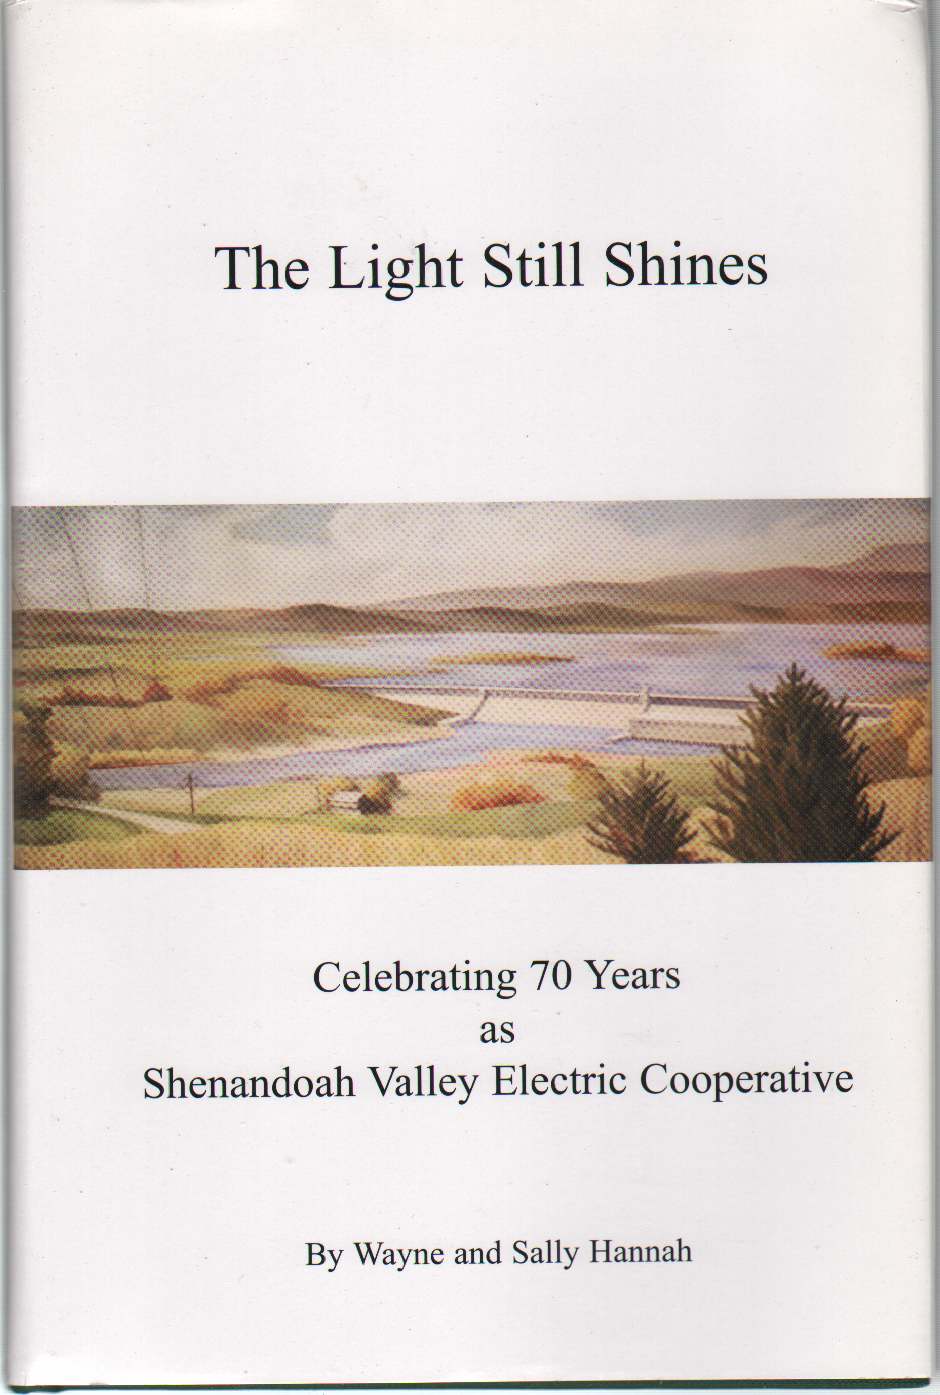 Image for LIGHT STILL SHINES Celebrating 70 Years As Shenandoah Valley Electric Cooperative Mt. Crawford, Virginia, 1936-2006